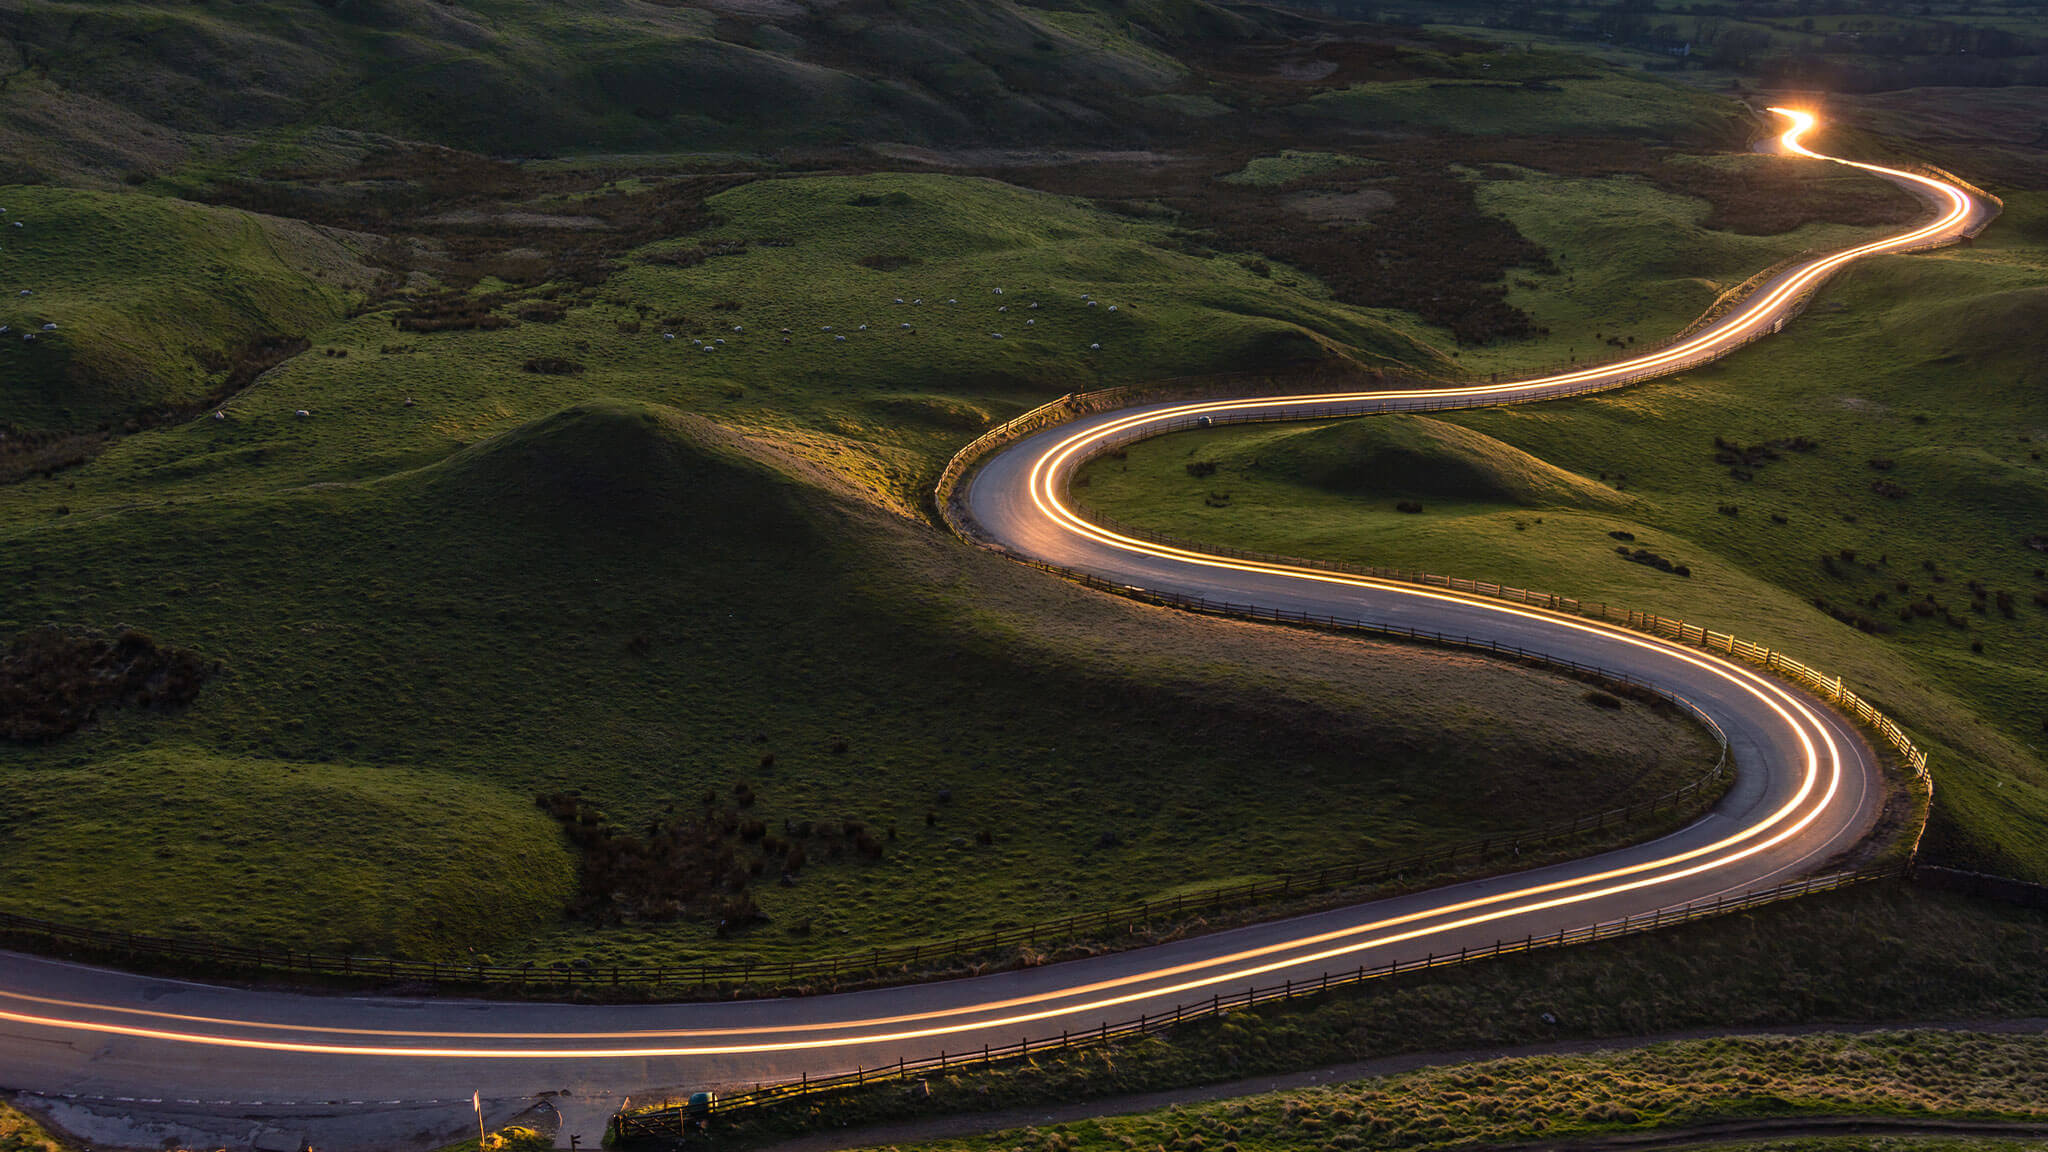 Time lapse of road winding through hills at sunset.